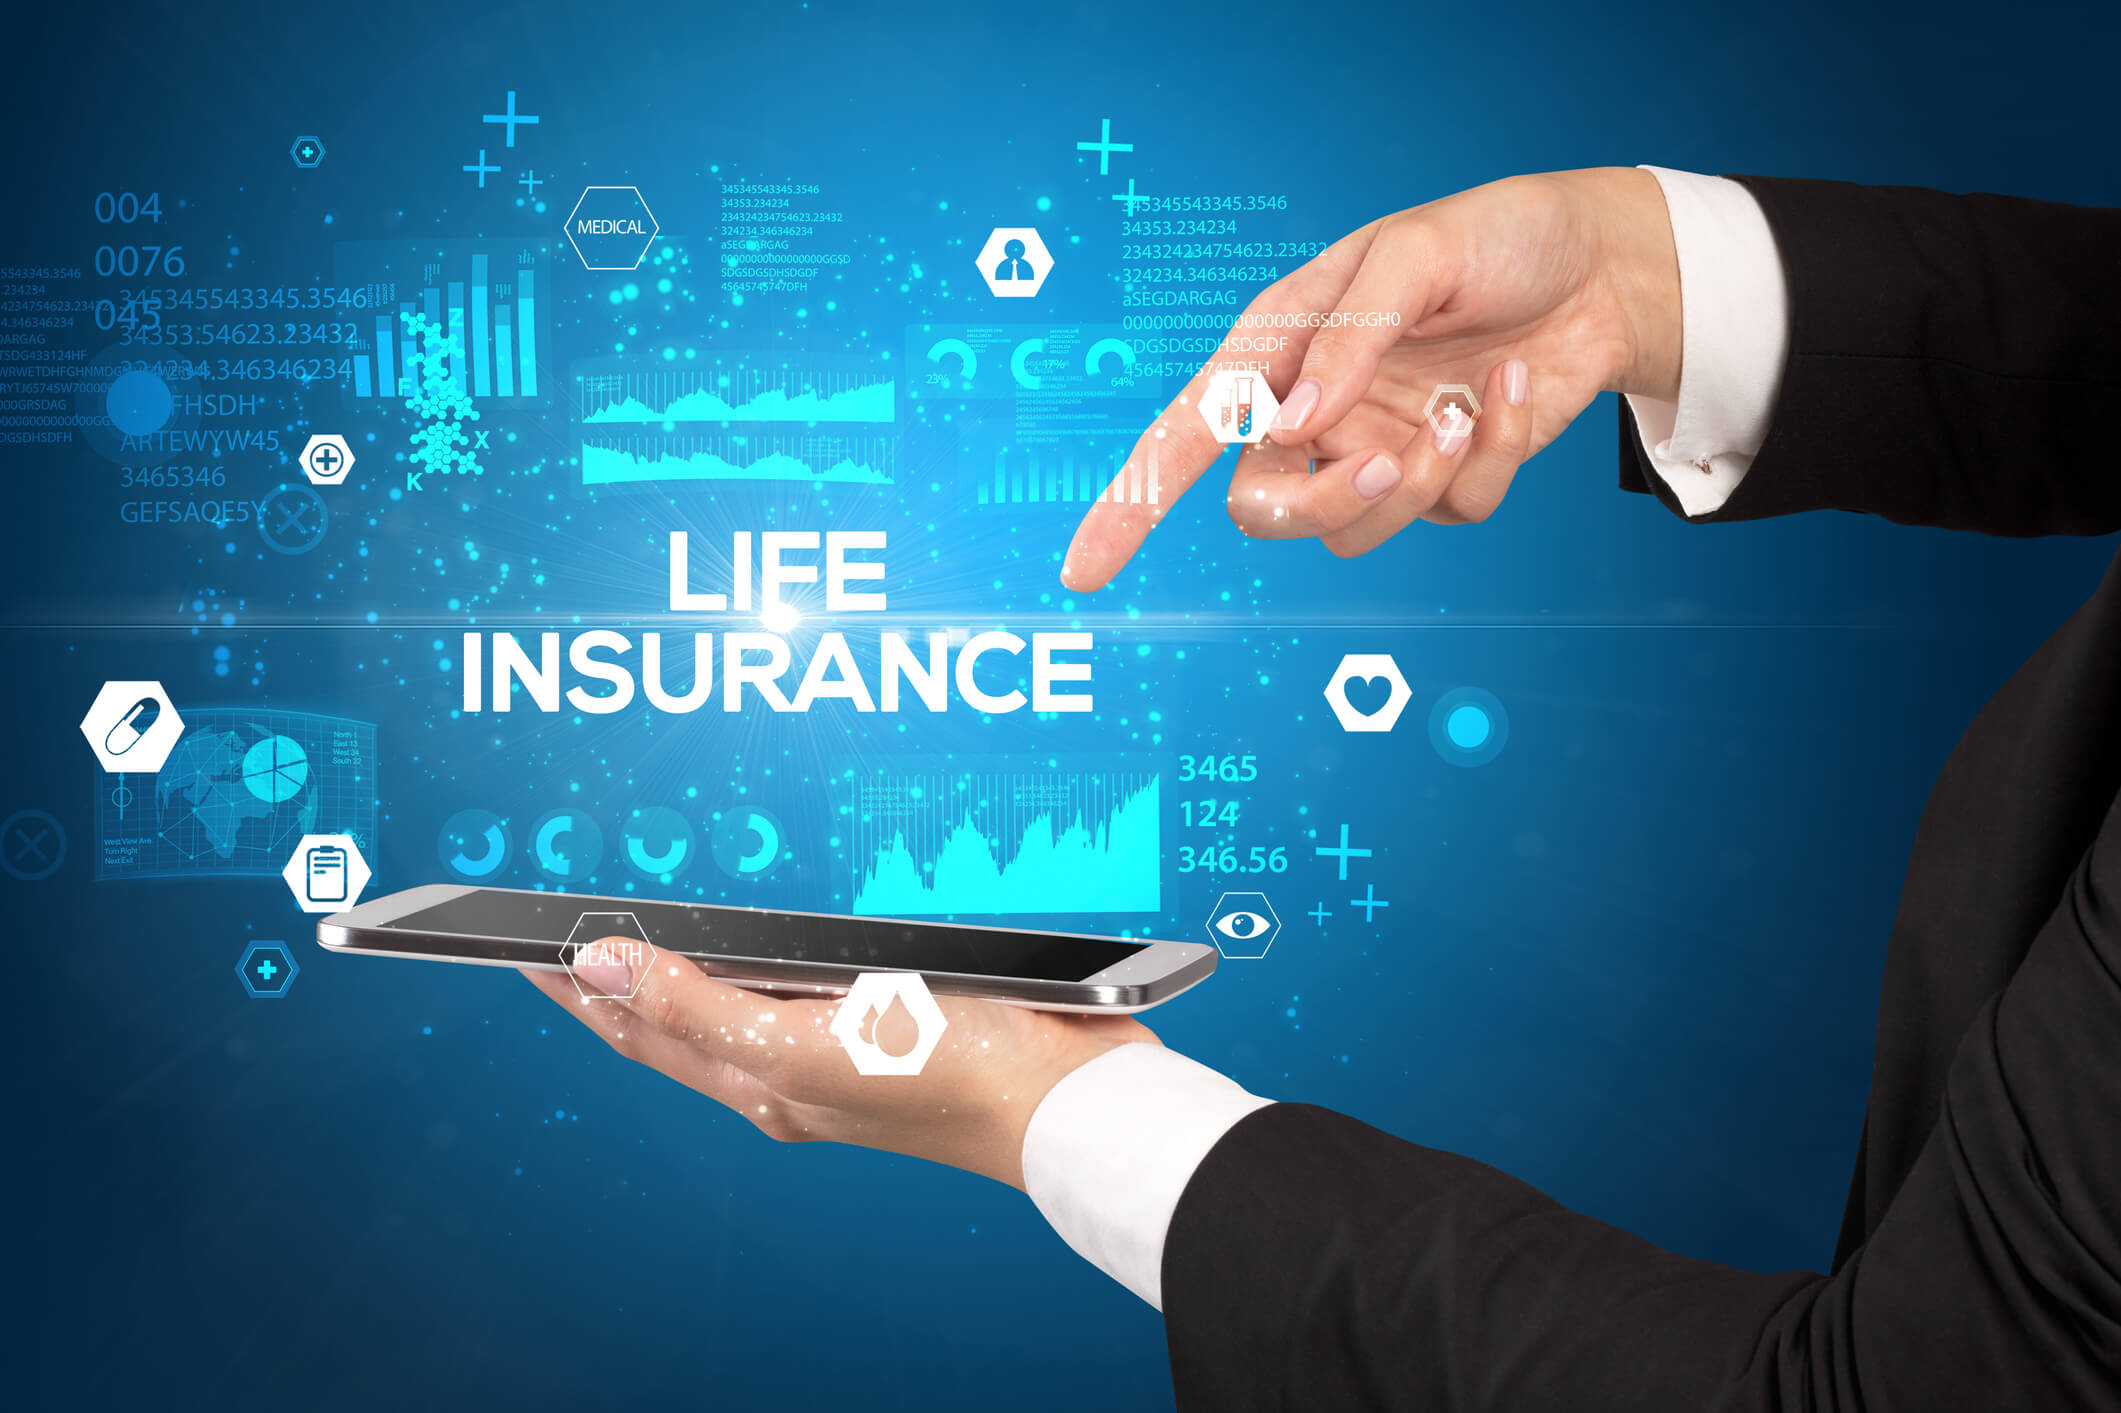 Life Insurance - Complete Controller